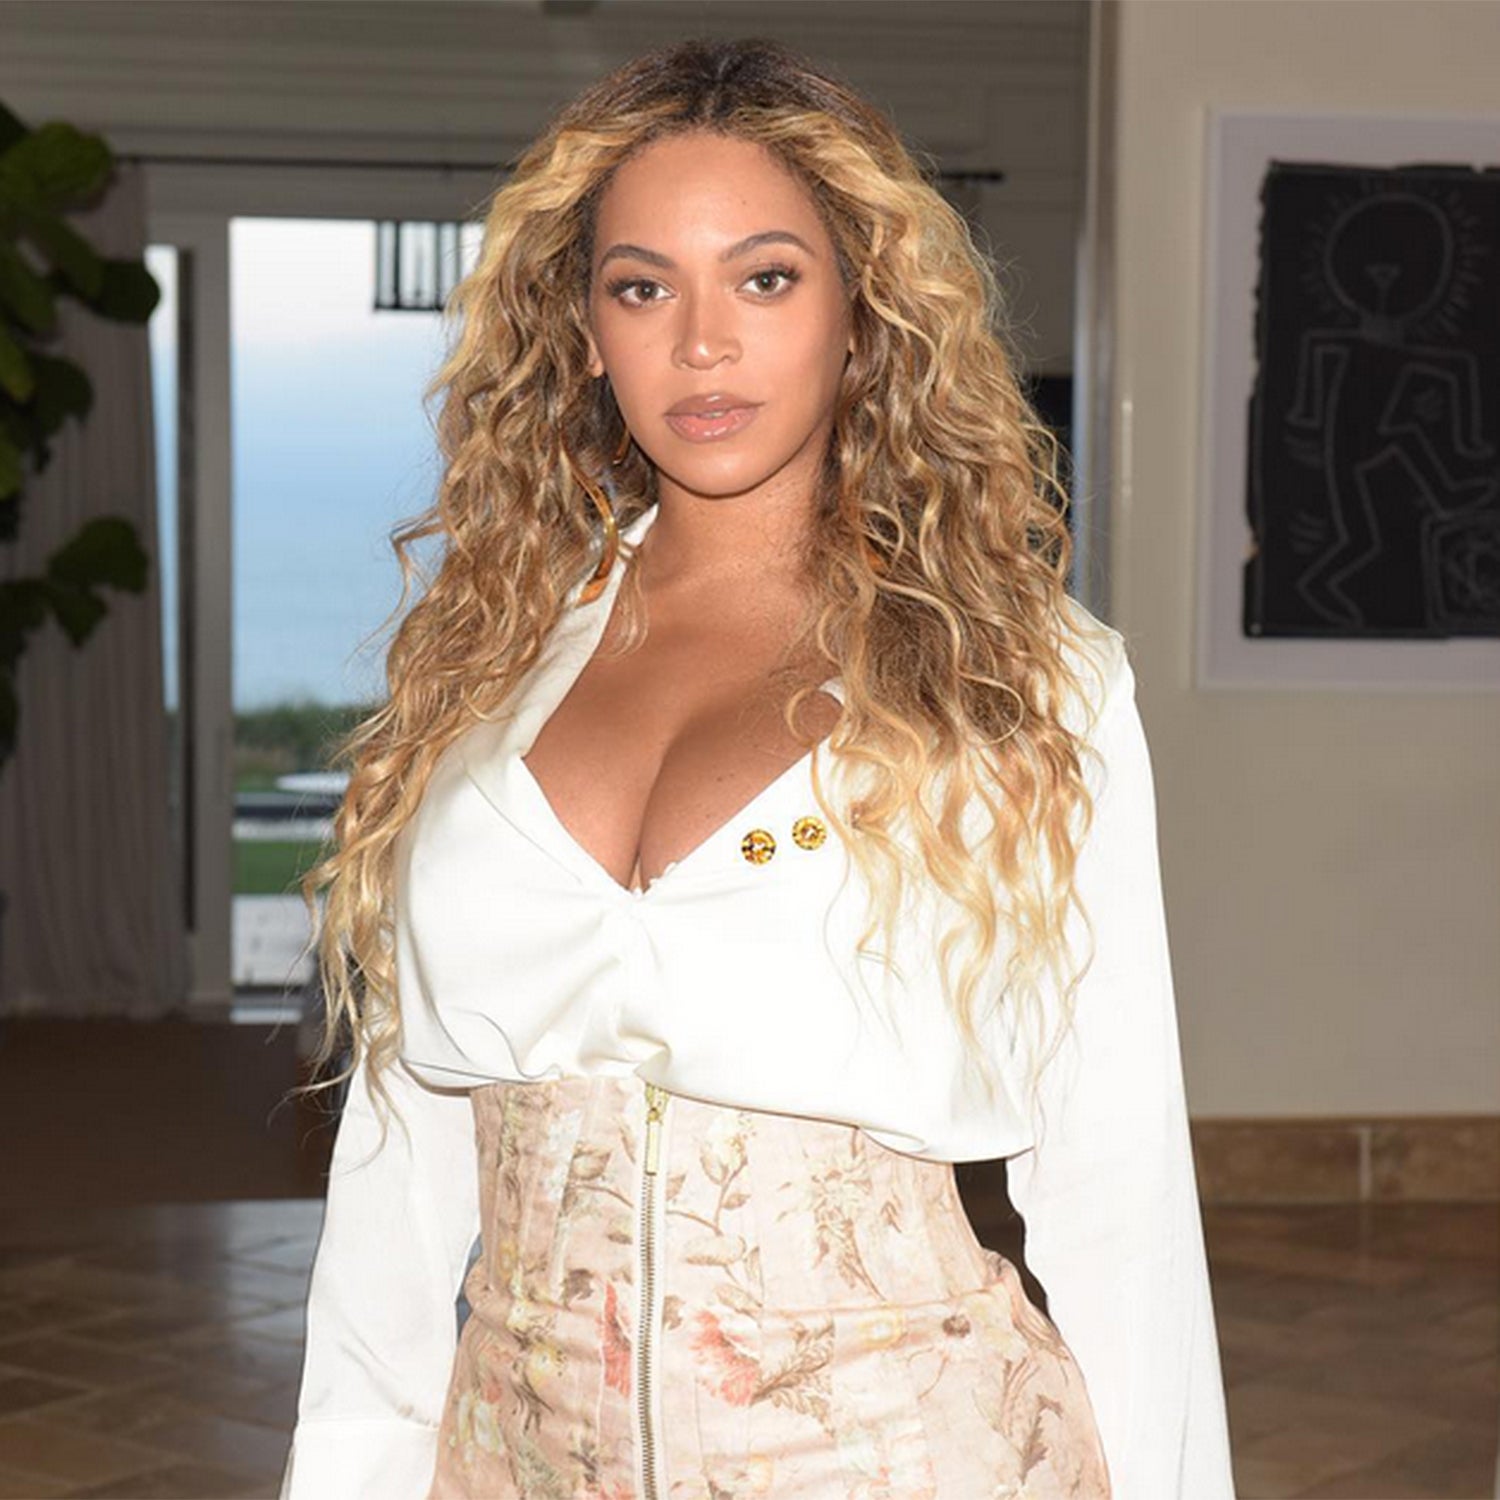 Mom Of 3 Beyoncé Steps Out In Curve-Hugging Mini One Month After Welcoming Twins